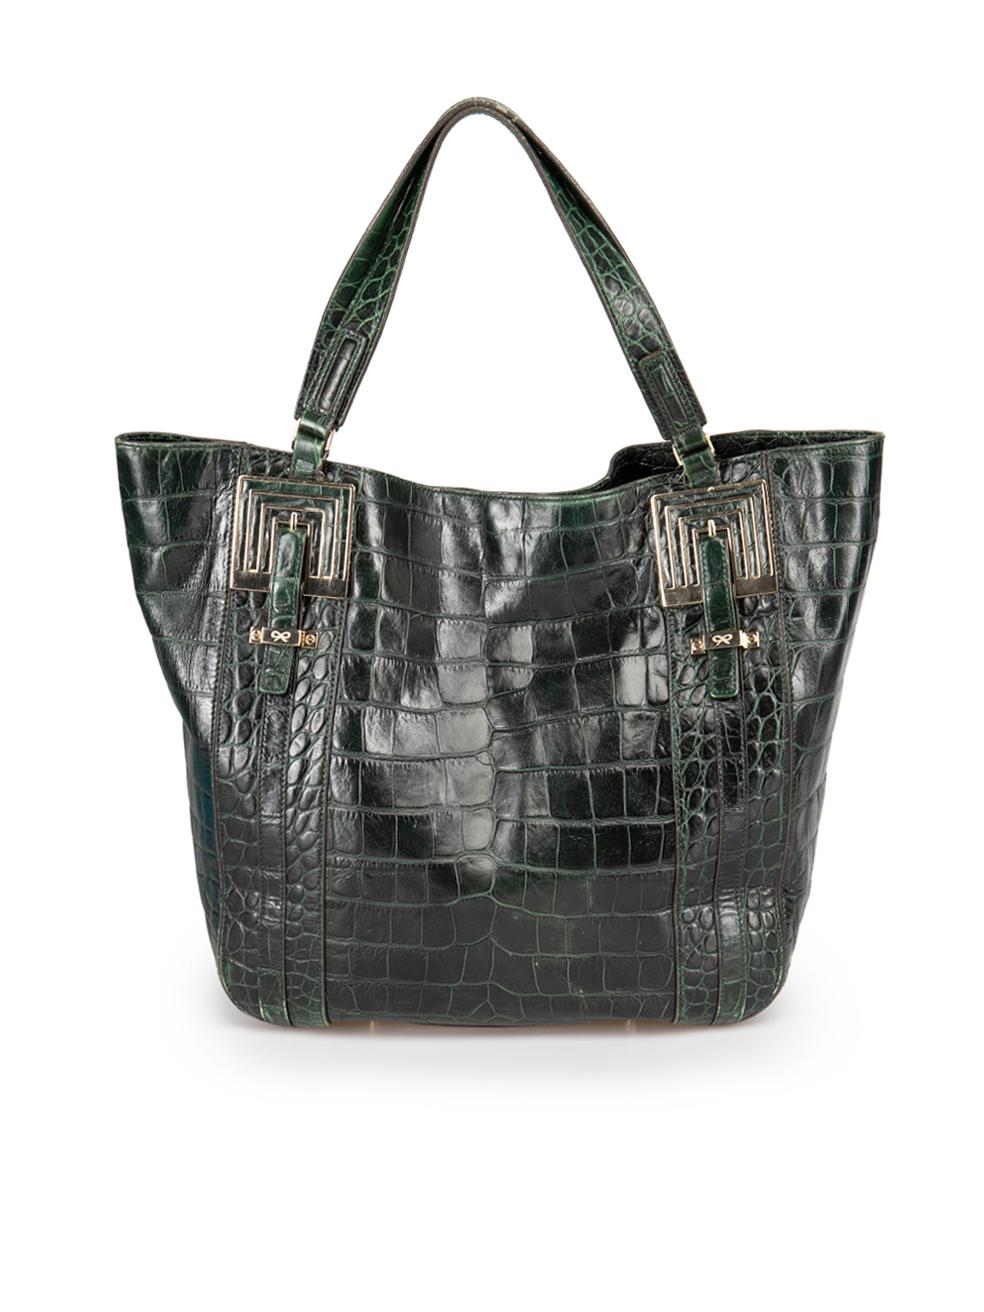 Anya Hindmarch Green Leather Croc Embossed Tote In Good Condition In London, GB